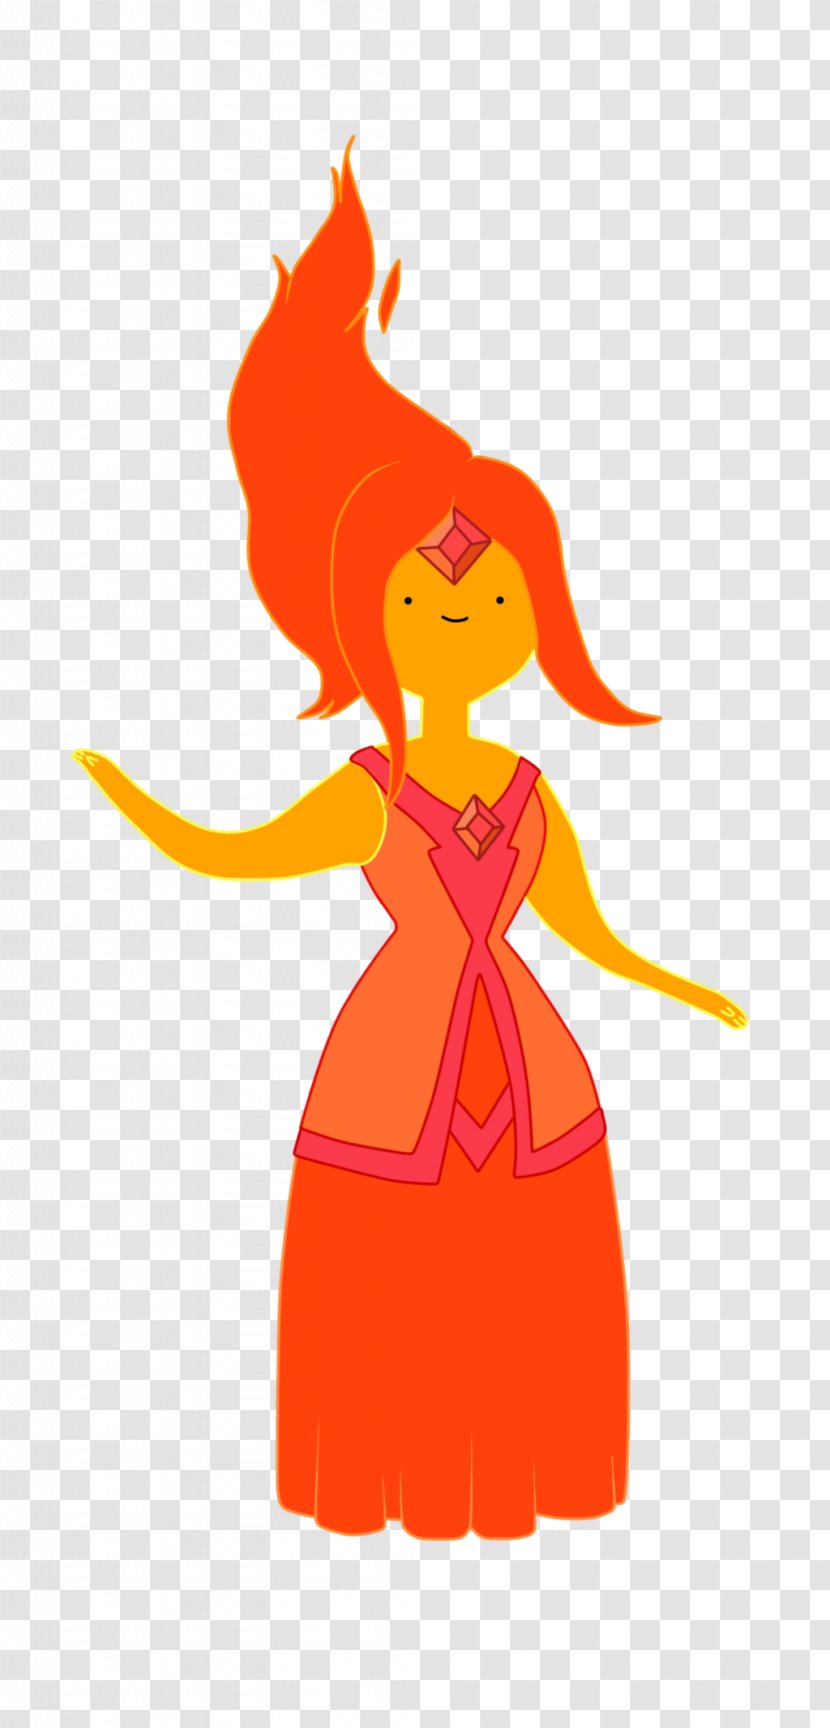 Flame Princess Marceline The Vampire Queen Finn Human Adventure Time: Explore Dungeon Because I Don't Know! Jake Dog - Ice King Transparent PNG